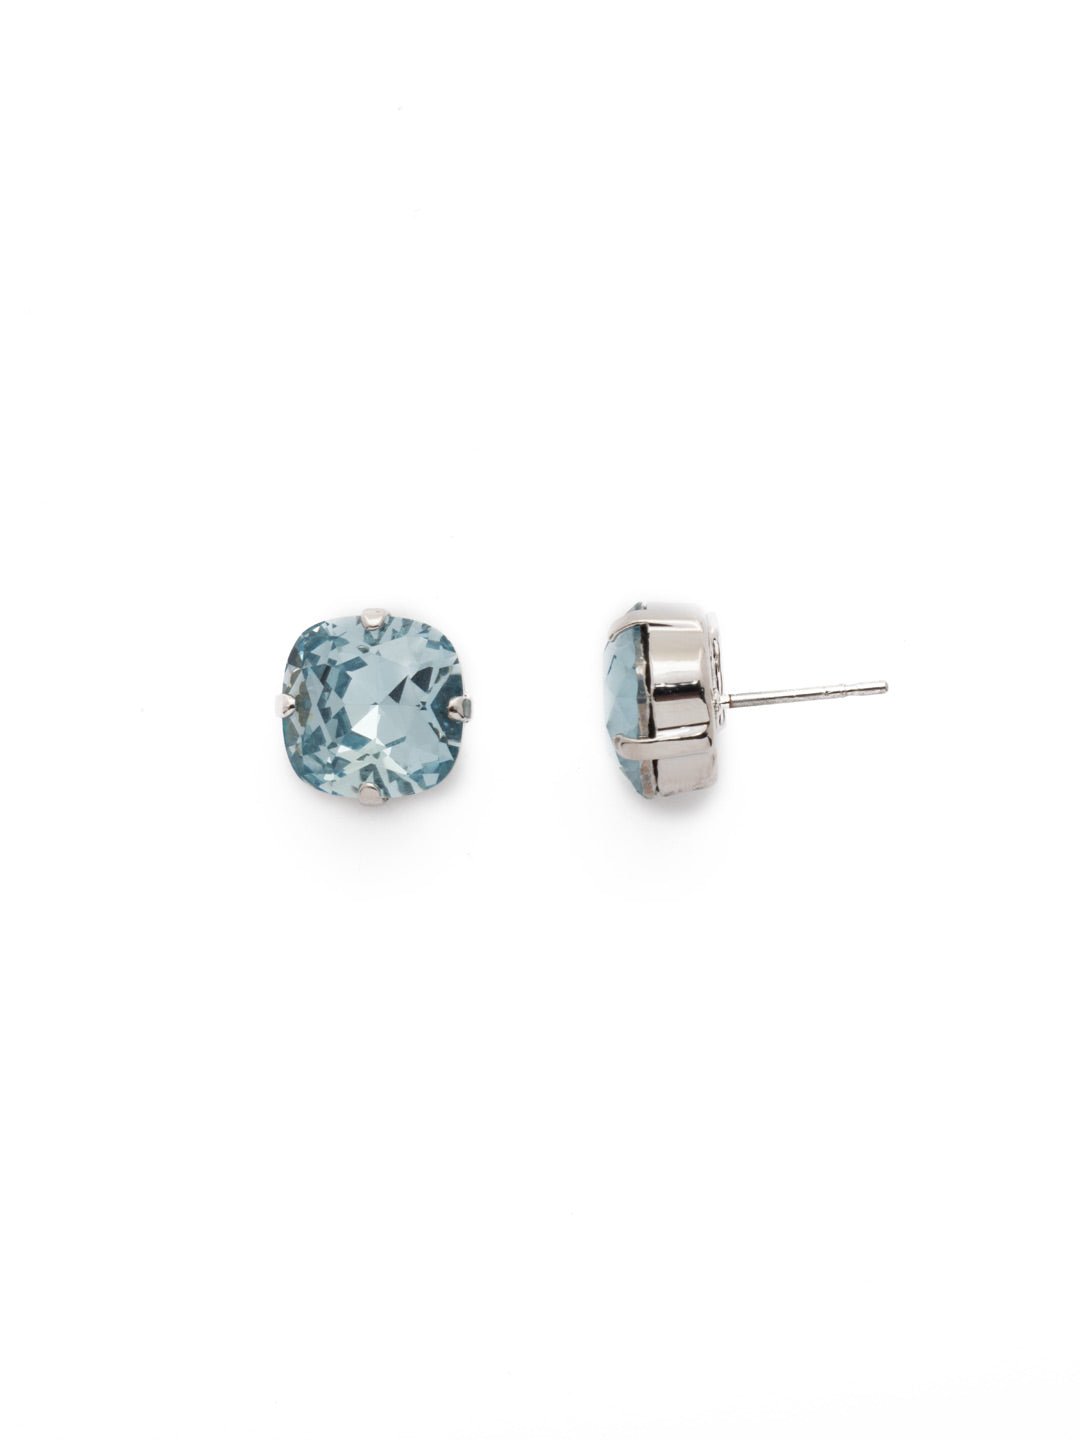 Halcyon Stud Earrings - EDH25RHLAQ - <p>A beautiful, luminous cushion-cut crystal in a classic four-pronged setting that's ideal for everyday wear. From Sorrelli's Light Aqua collection in our Palladium Silver-tone finish.</p>